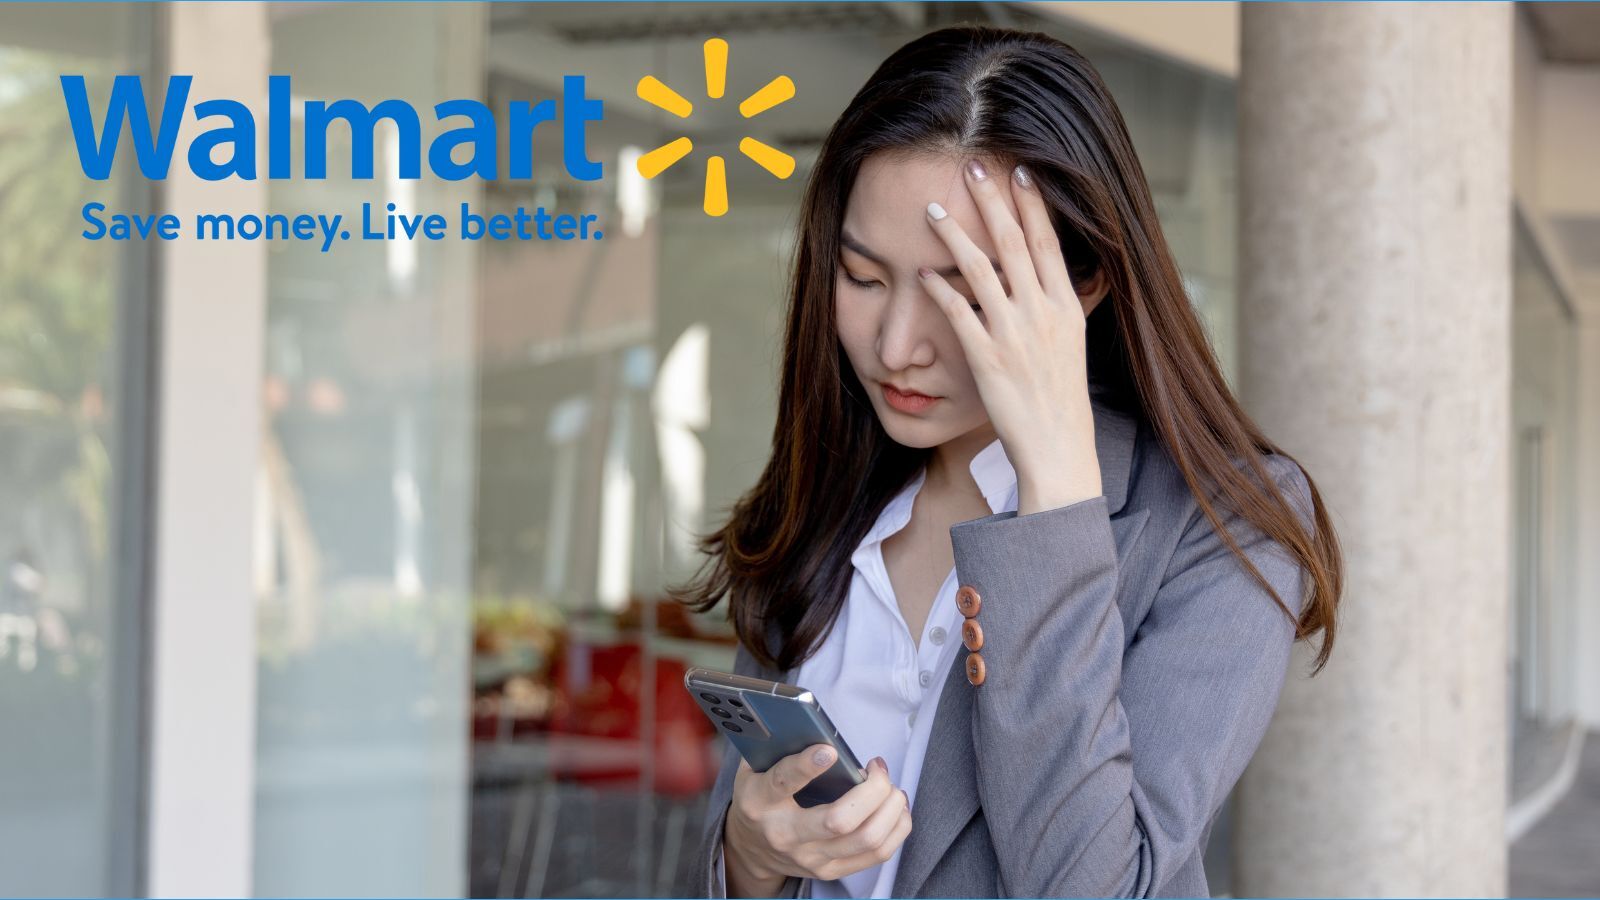 How To Call In Sick At Walmart - This Is Important!